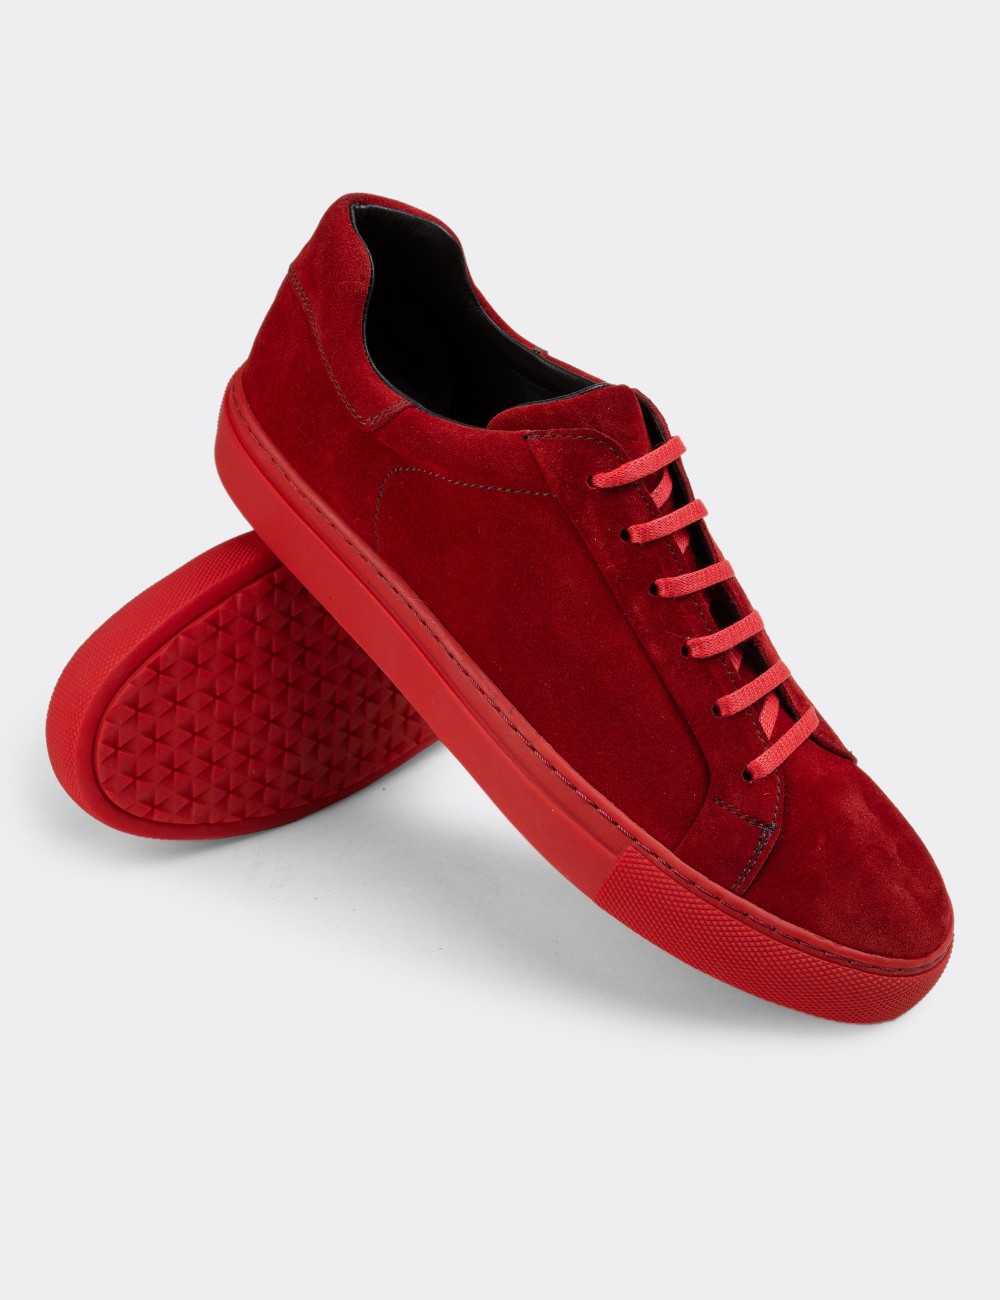 Red Suede Leather Sneakers - 01829MKRMC01